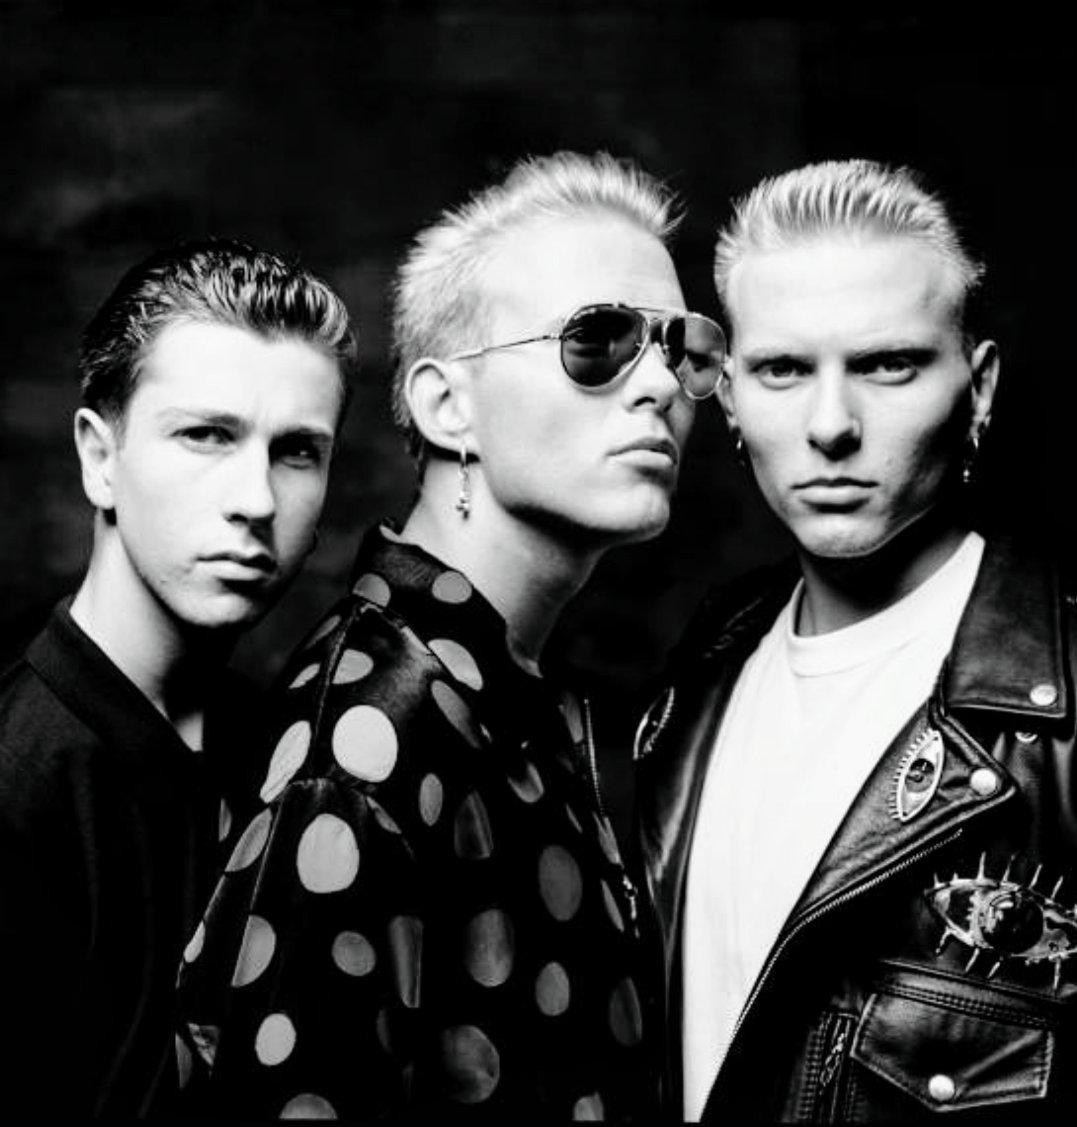 Bros photo by John Stoddart 

There's a cat among the pigeons
There's a pain in her chest
While the cat's among the pigeons
    there'll be no rest.

While the cat's among the pigeons
    he'll take the best.

#80sBritishPop #MattGoss #LukeGoss #CraigLogan #Bros